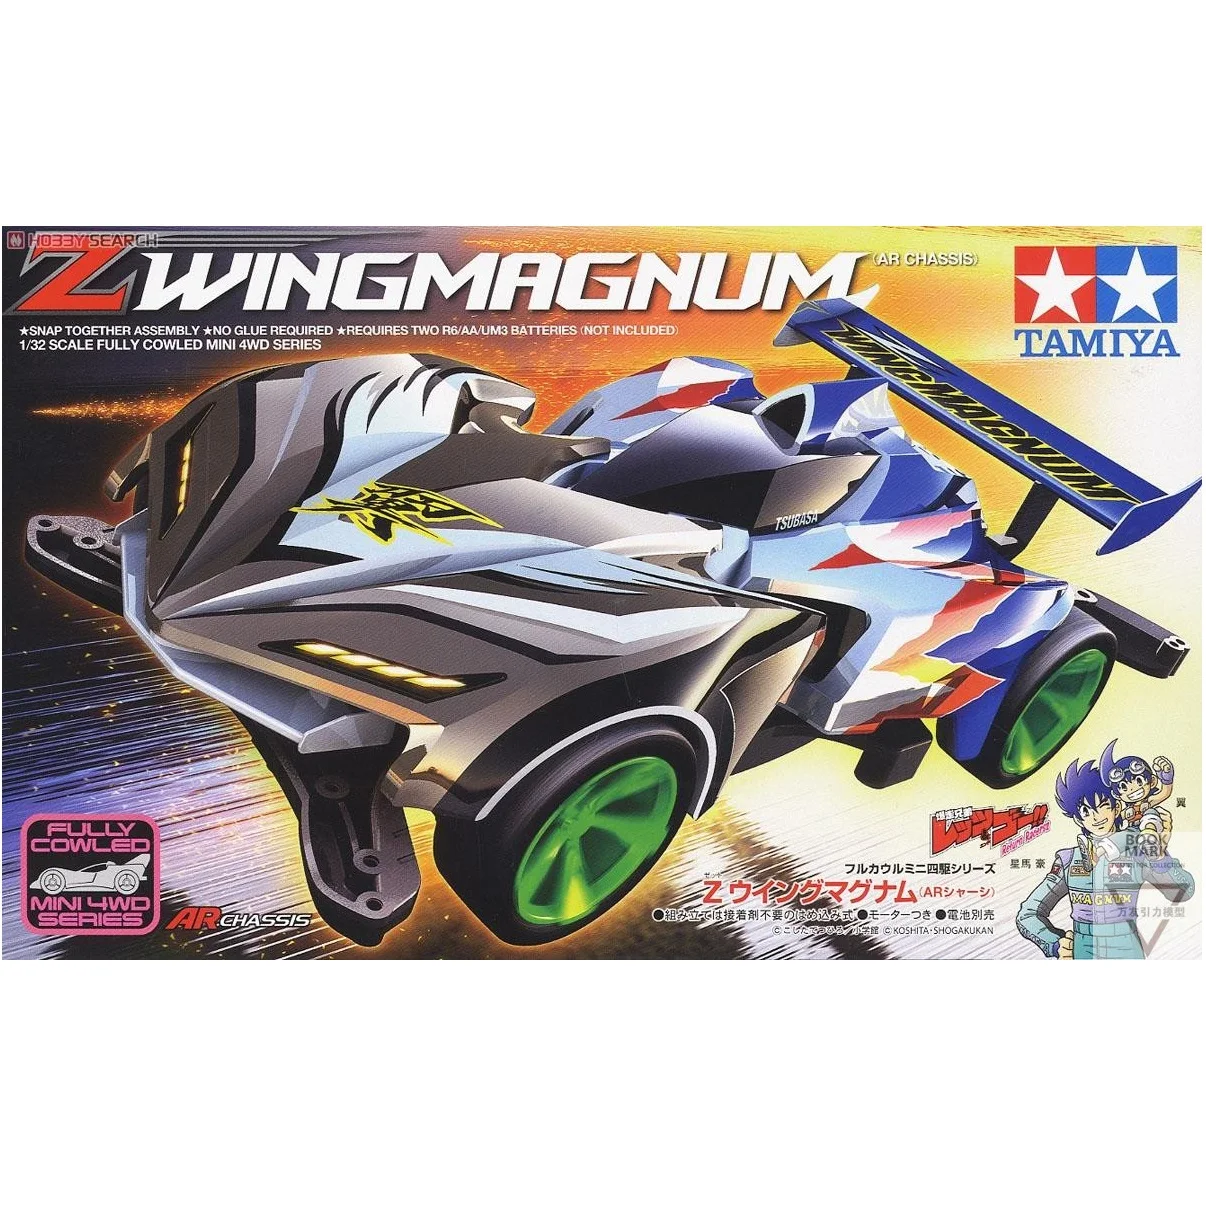 

Tamiya 1/32 Mini 4wd 19442 AR chassis ZWINGMAGNUM Let's Go Anime Action Figure Assemble Model Children's Toys Birthday Gift